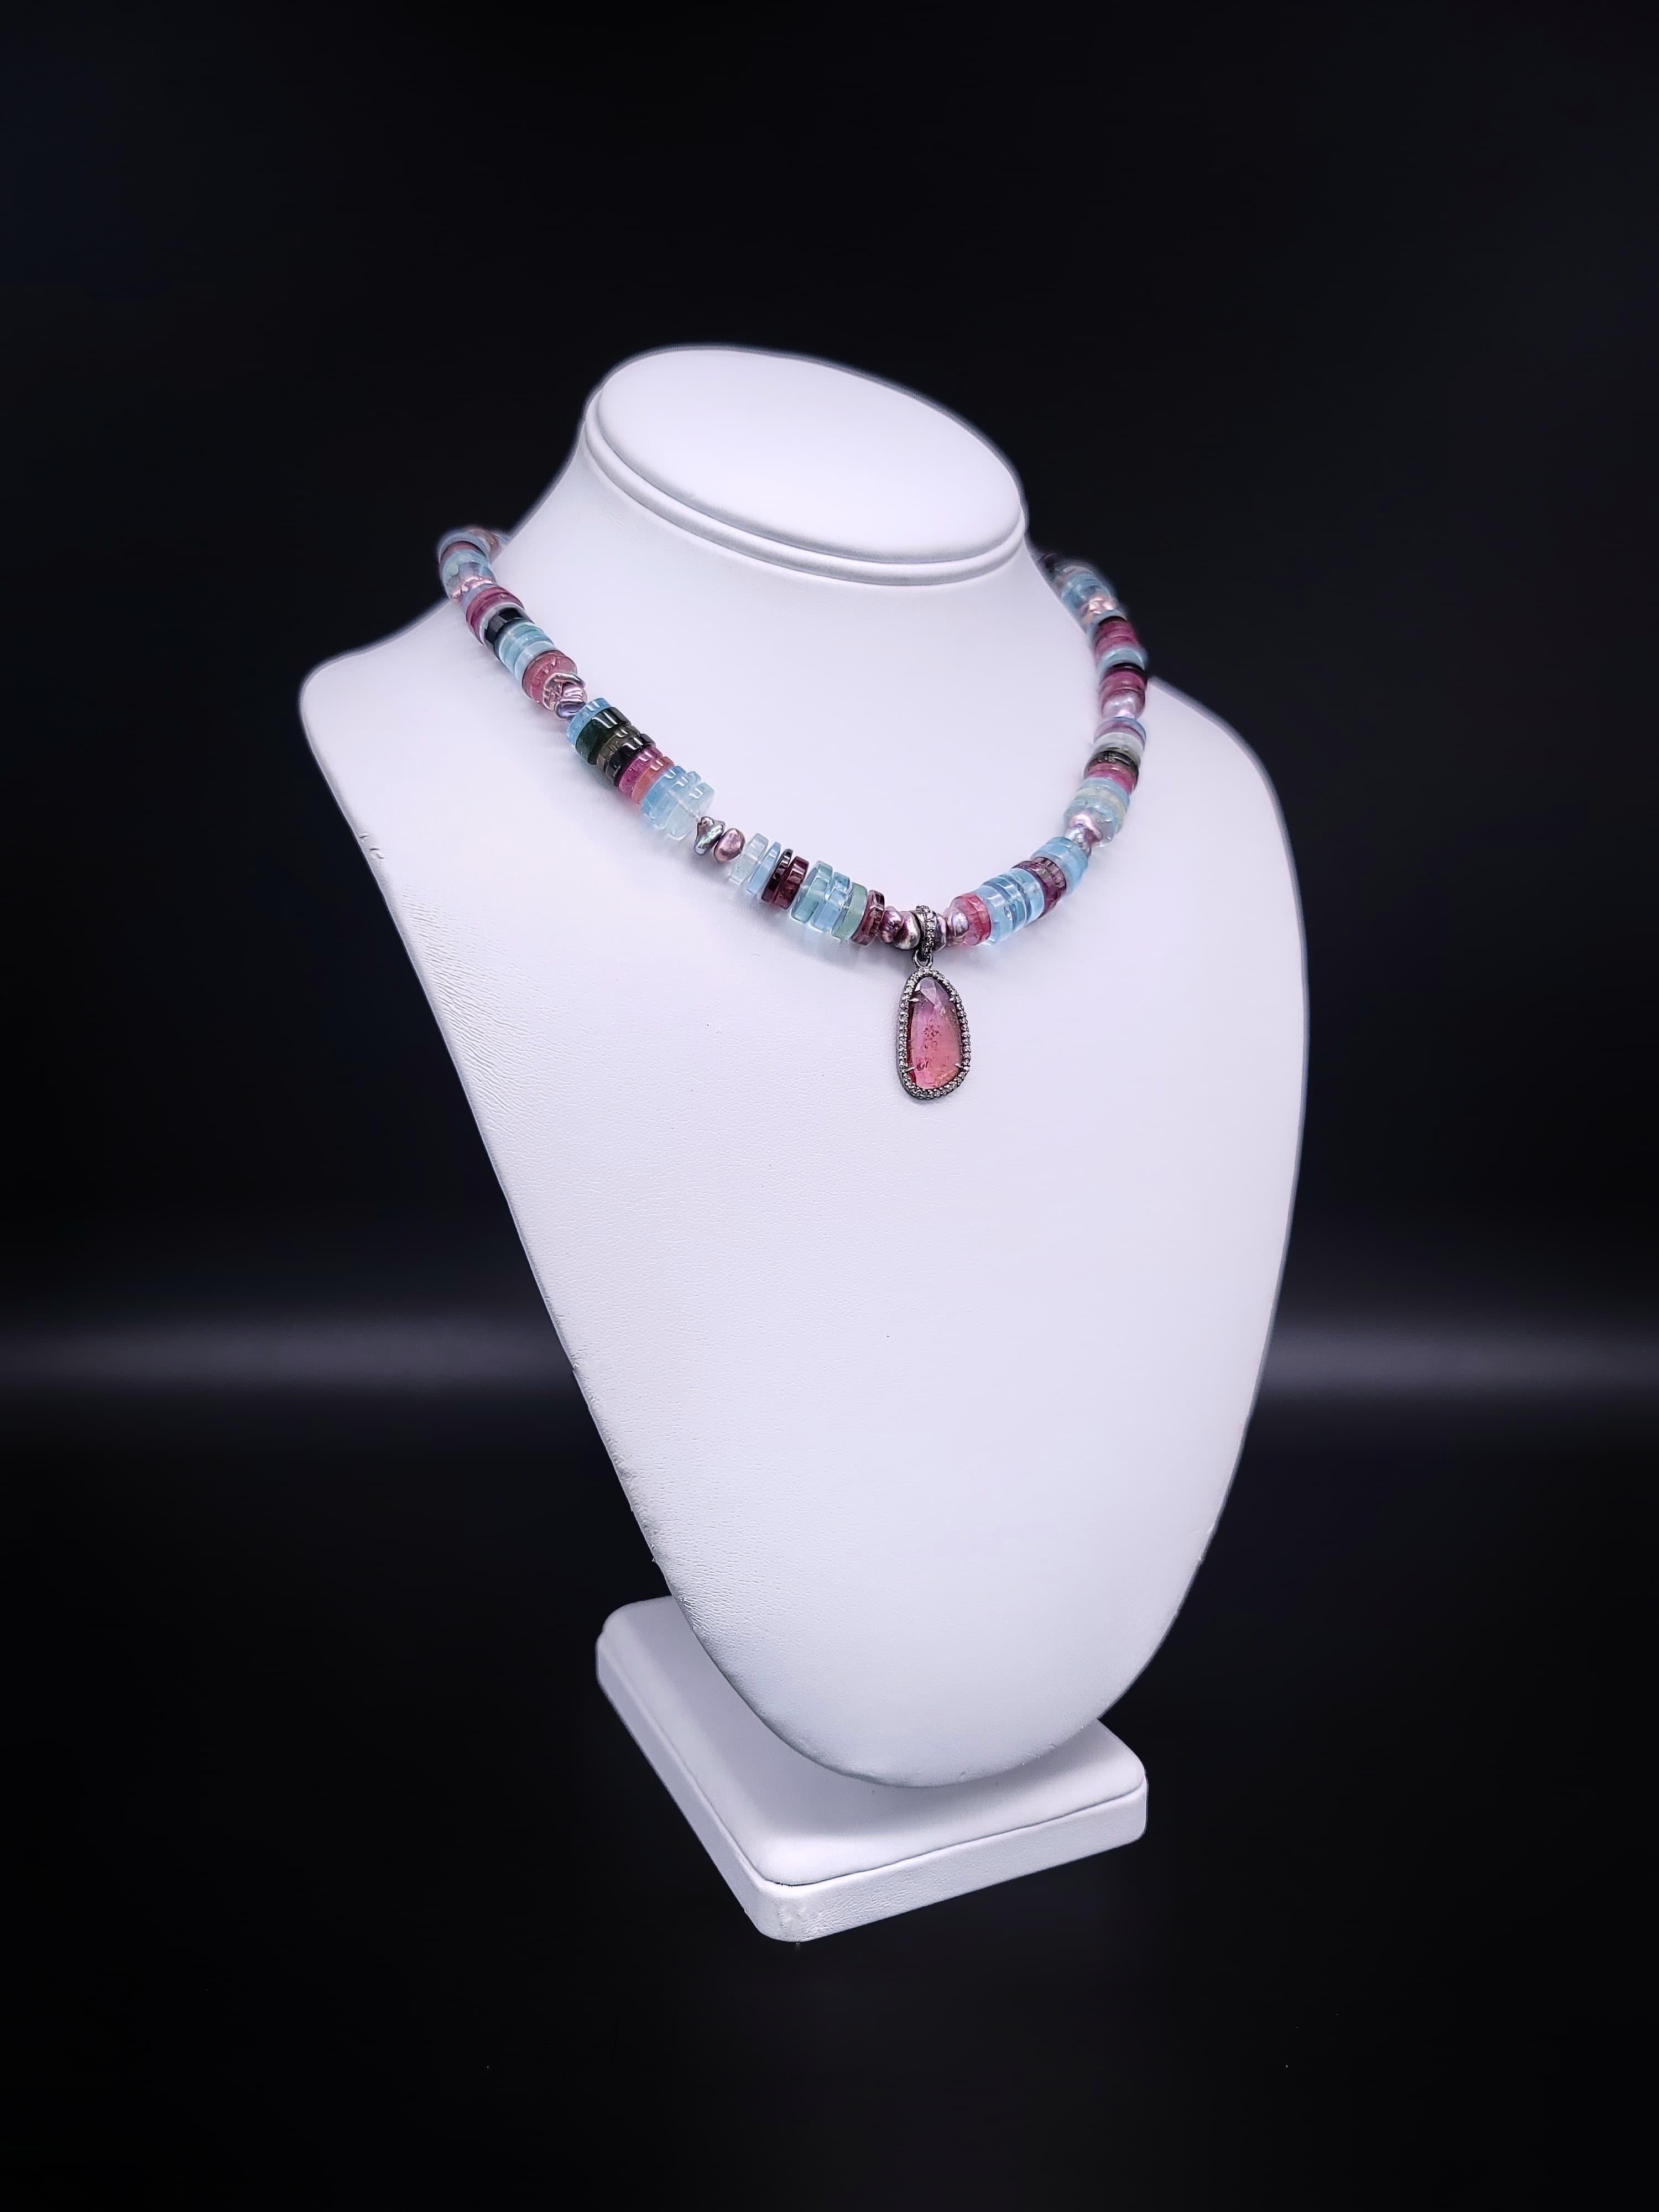 One-of-a-Kind 
Introducing the stunning Watermelon Tourmaline and Aquamarine necklace, a beautifully colored strand that exudes elegance and sophistication. Meticulously matched shades of dark green to pink Watermelon Tourmaline are complemented by